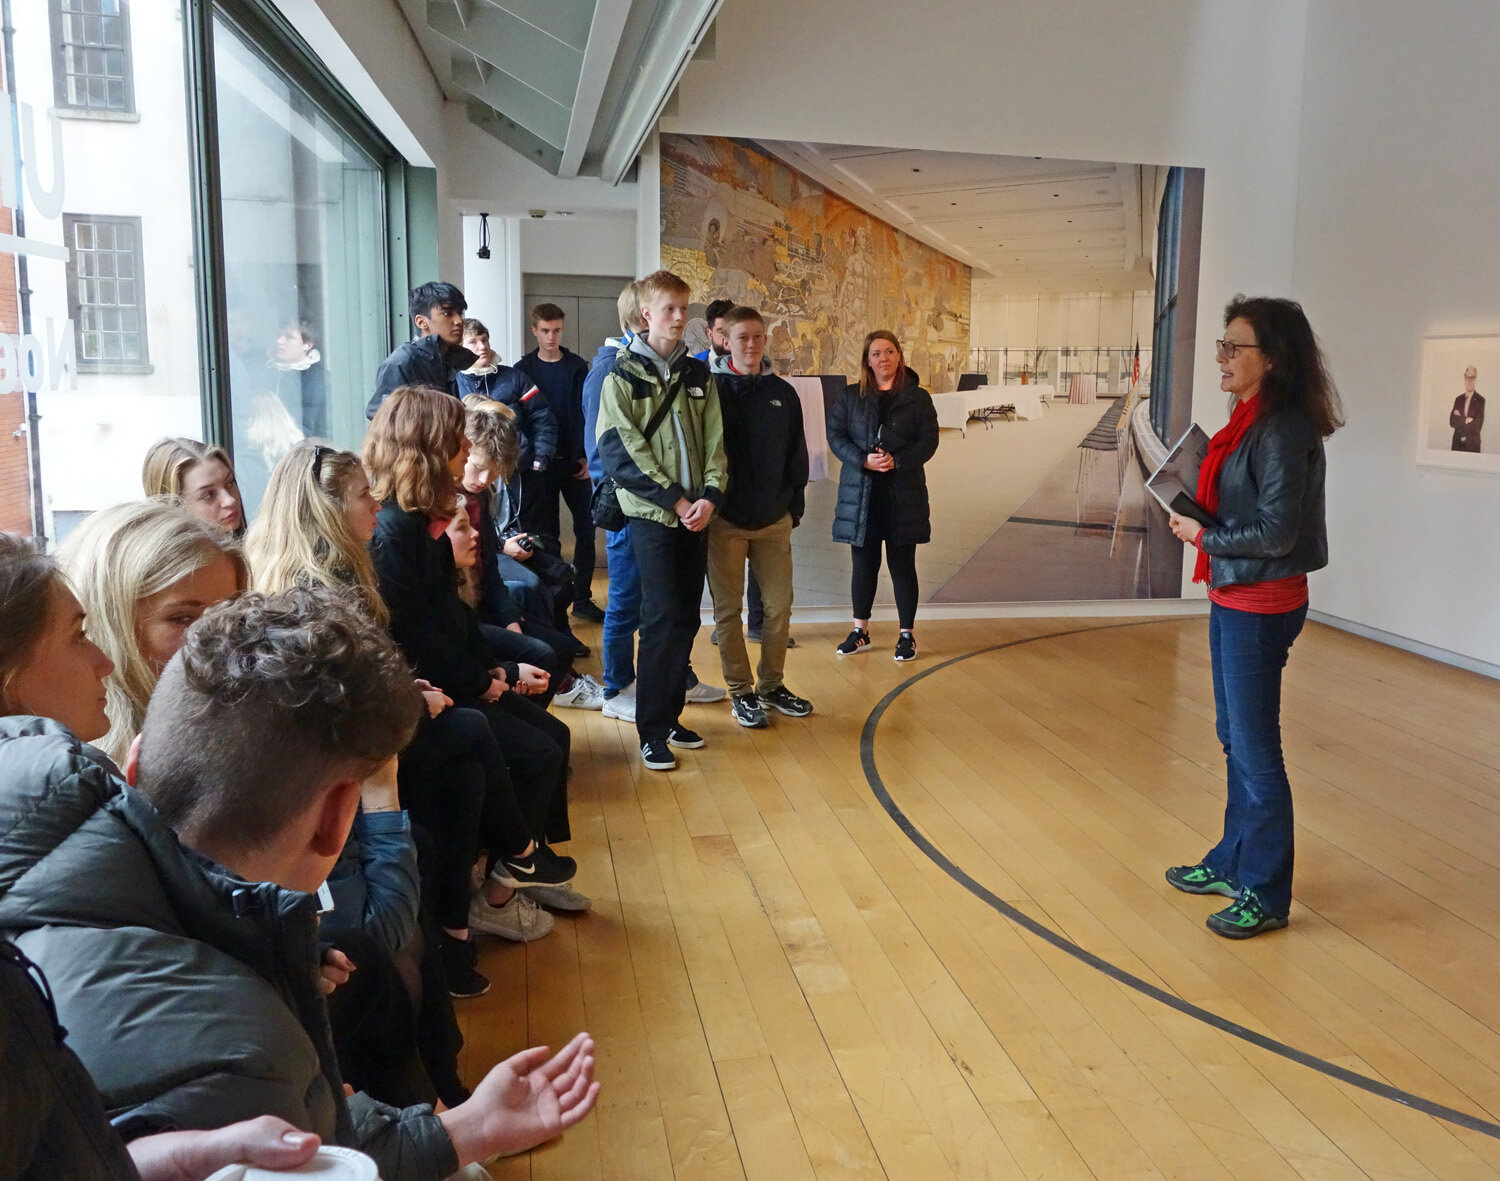  Curator Tanya Kiang gives a tour of the exhibition ‘Union’ 